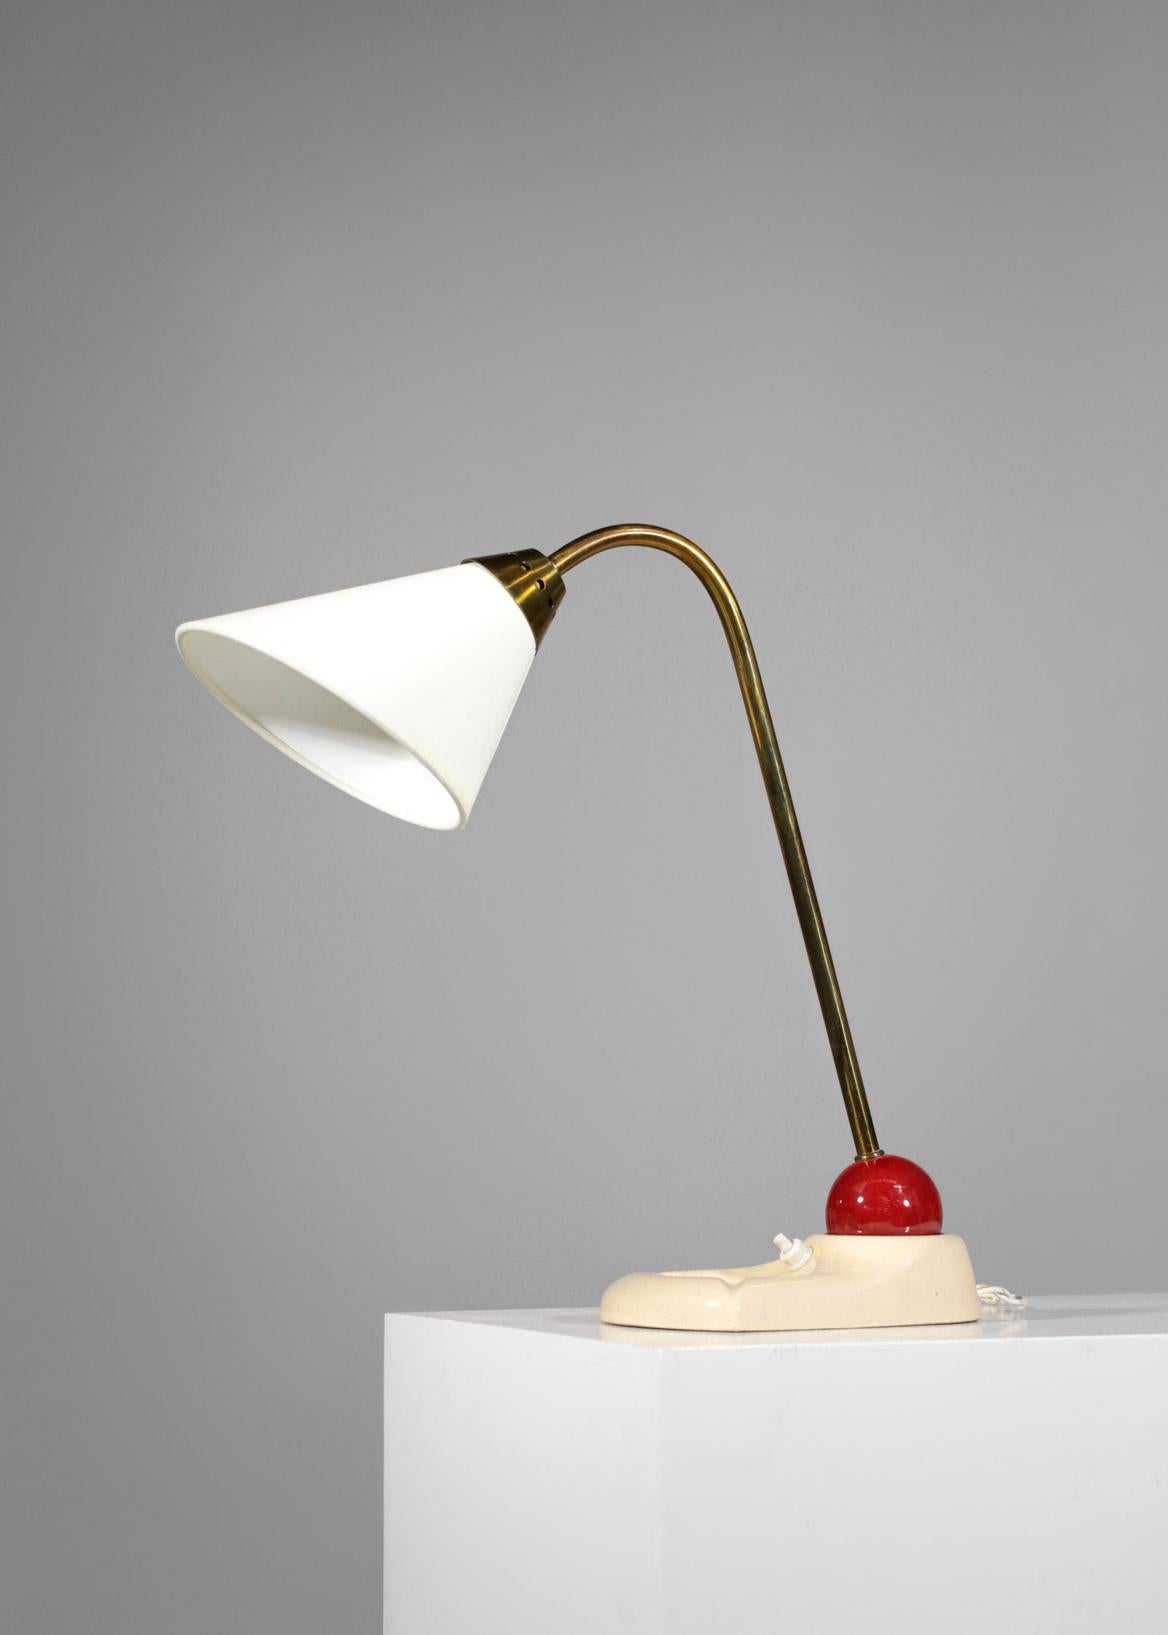 Mid-Century Modern French Ceramic Table Lamp 60's Ball in Style of George Jouve Vintage Brass